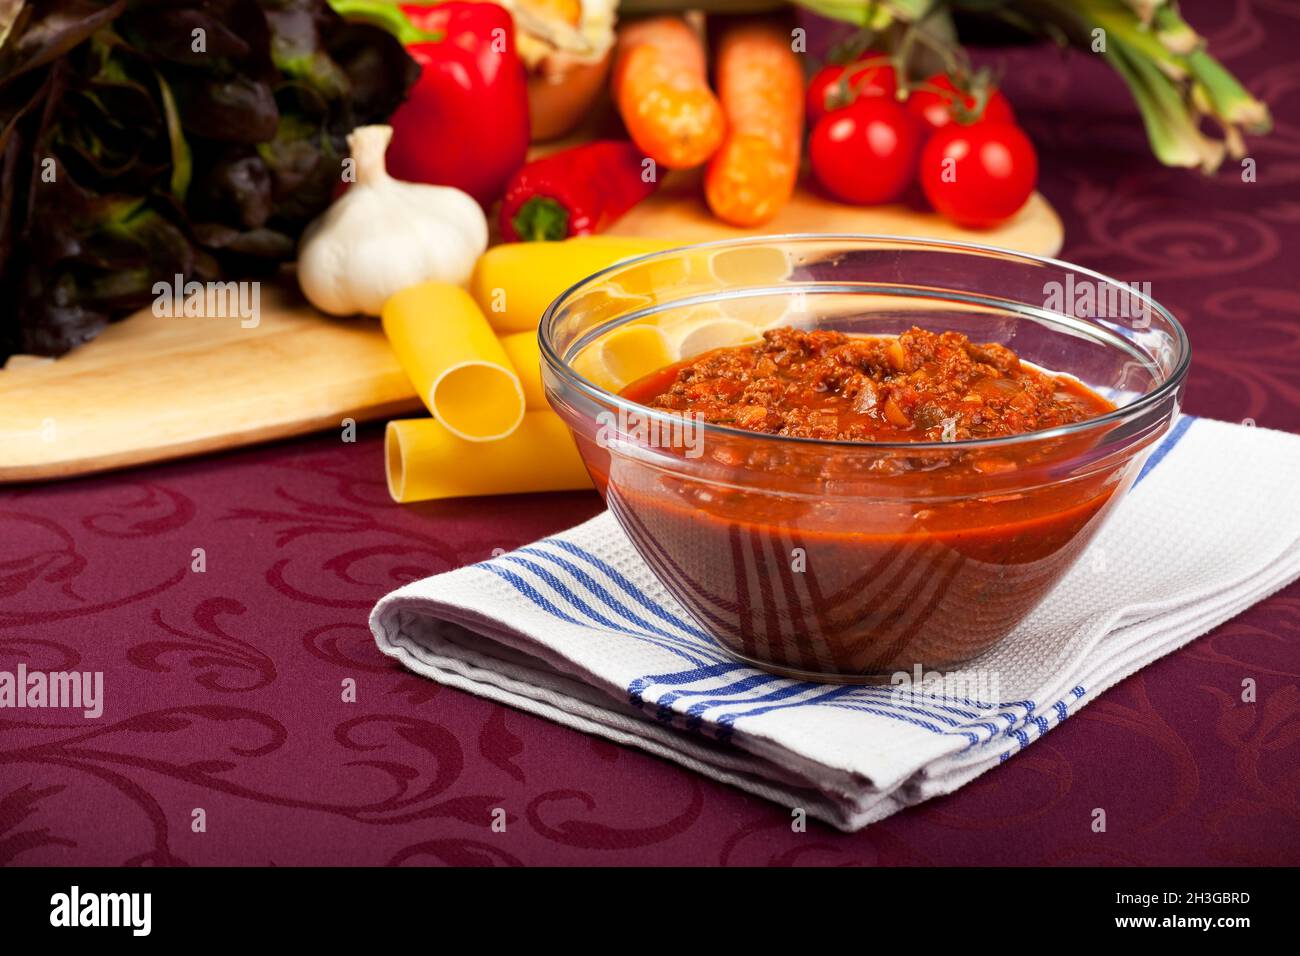 Bowl with Bolognese sauce and raw vegetables Stock Photo